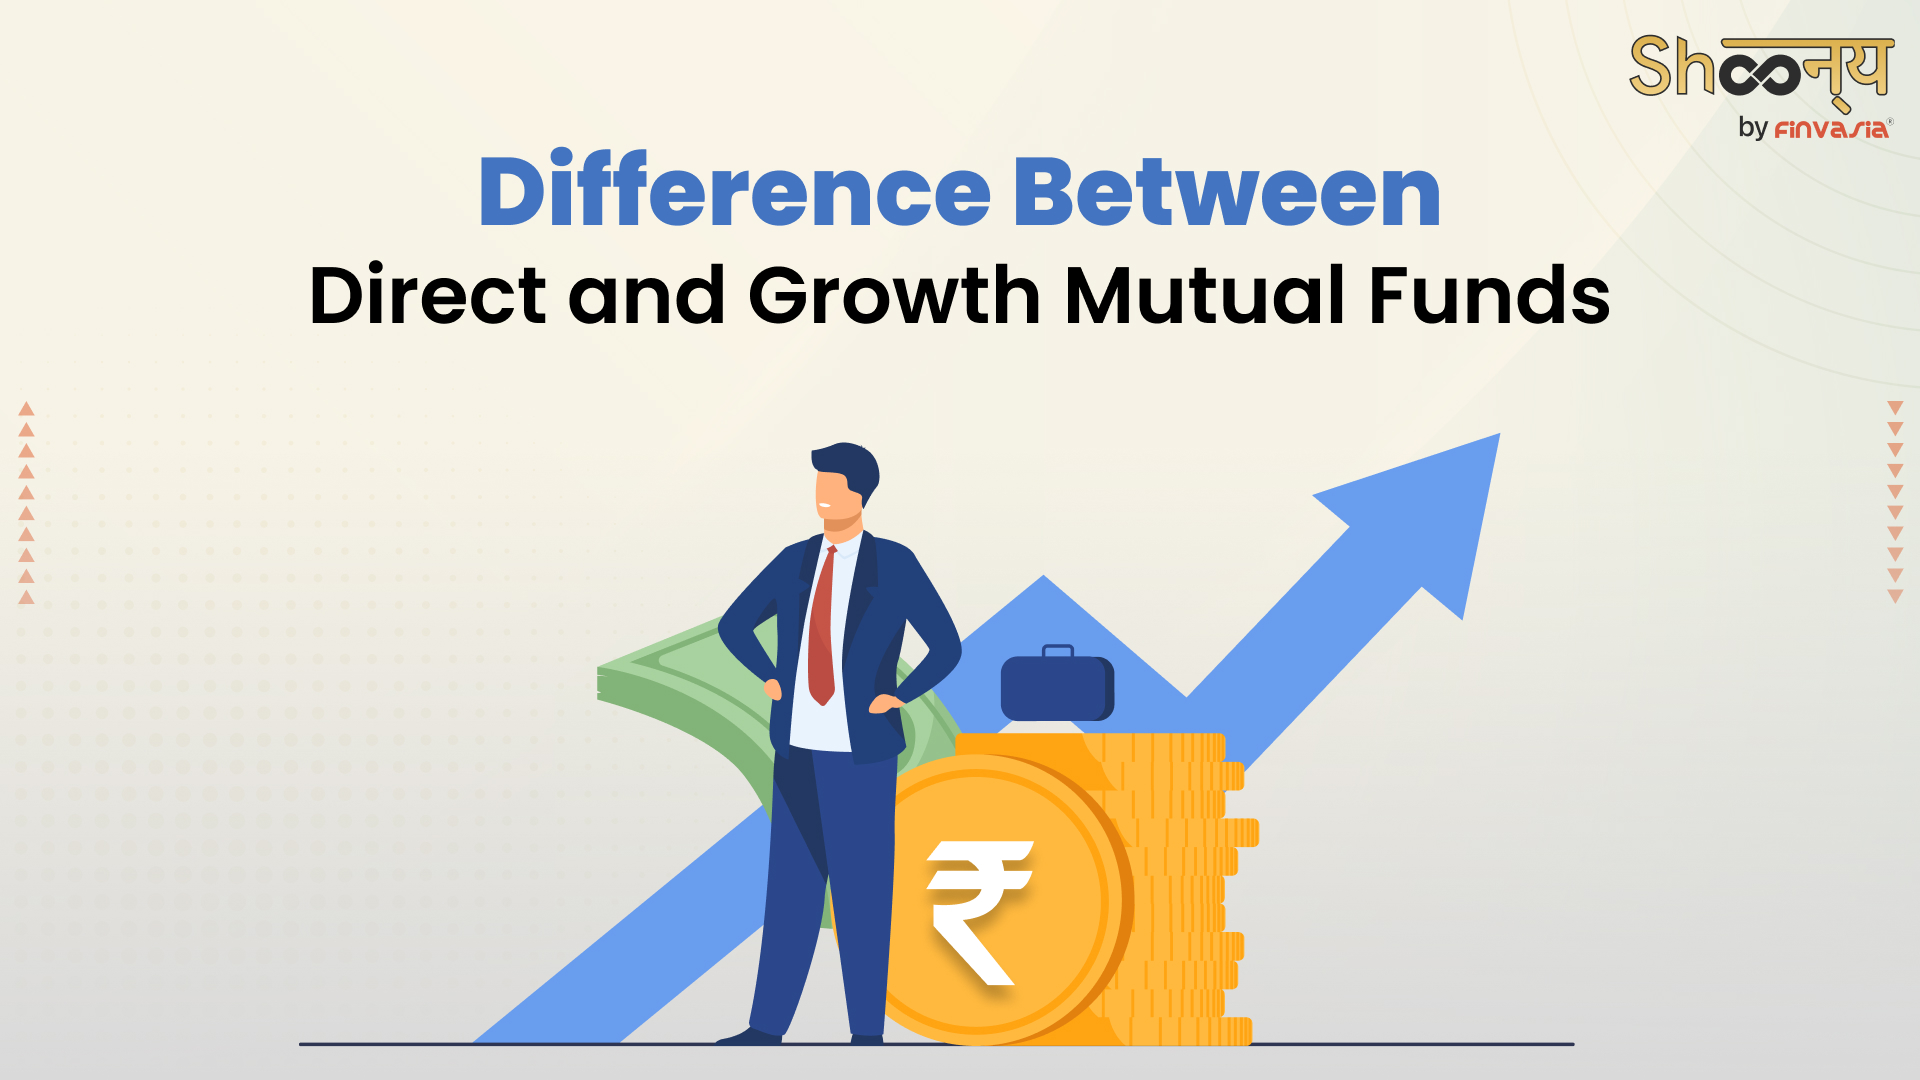 Deep Dive: Difference Between Direct and Growth Mutual Funds